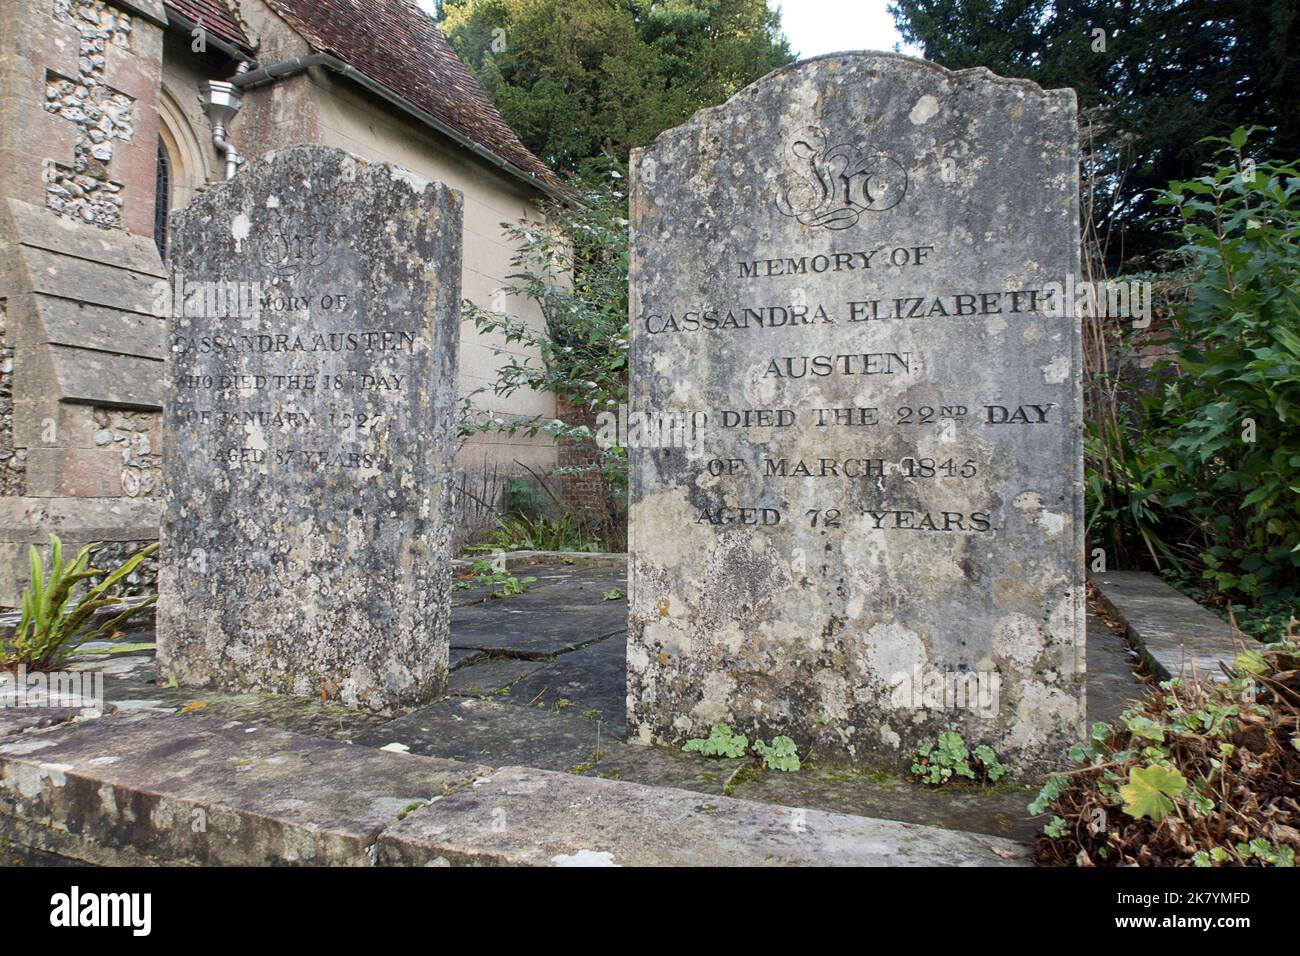 gravestones of Jane Austen's mother and sister in the churchyard of St Nicholas Church, Chawton, Hampshire, England Stock Photo